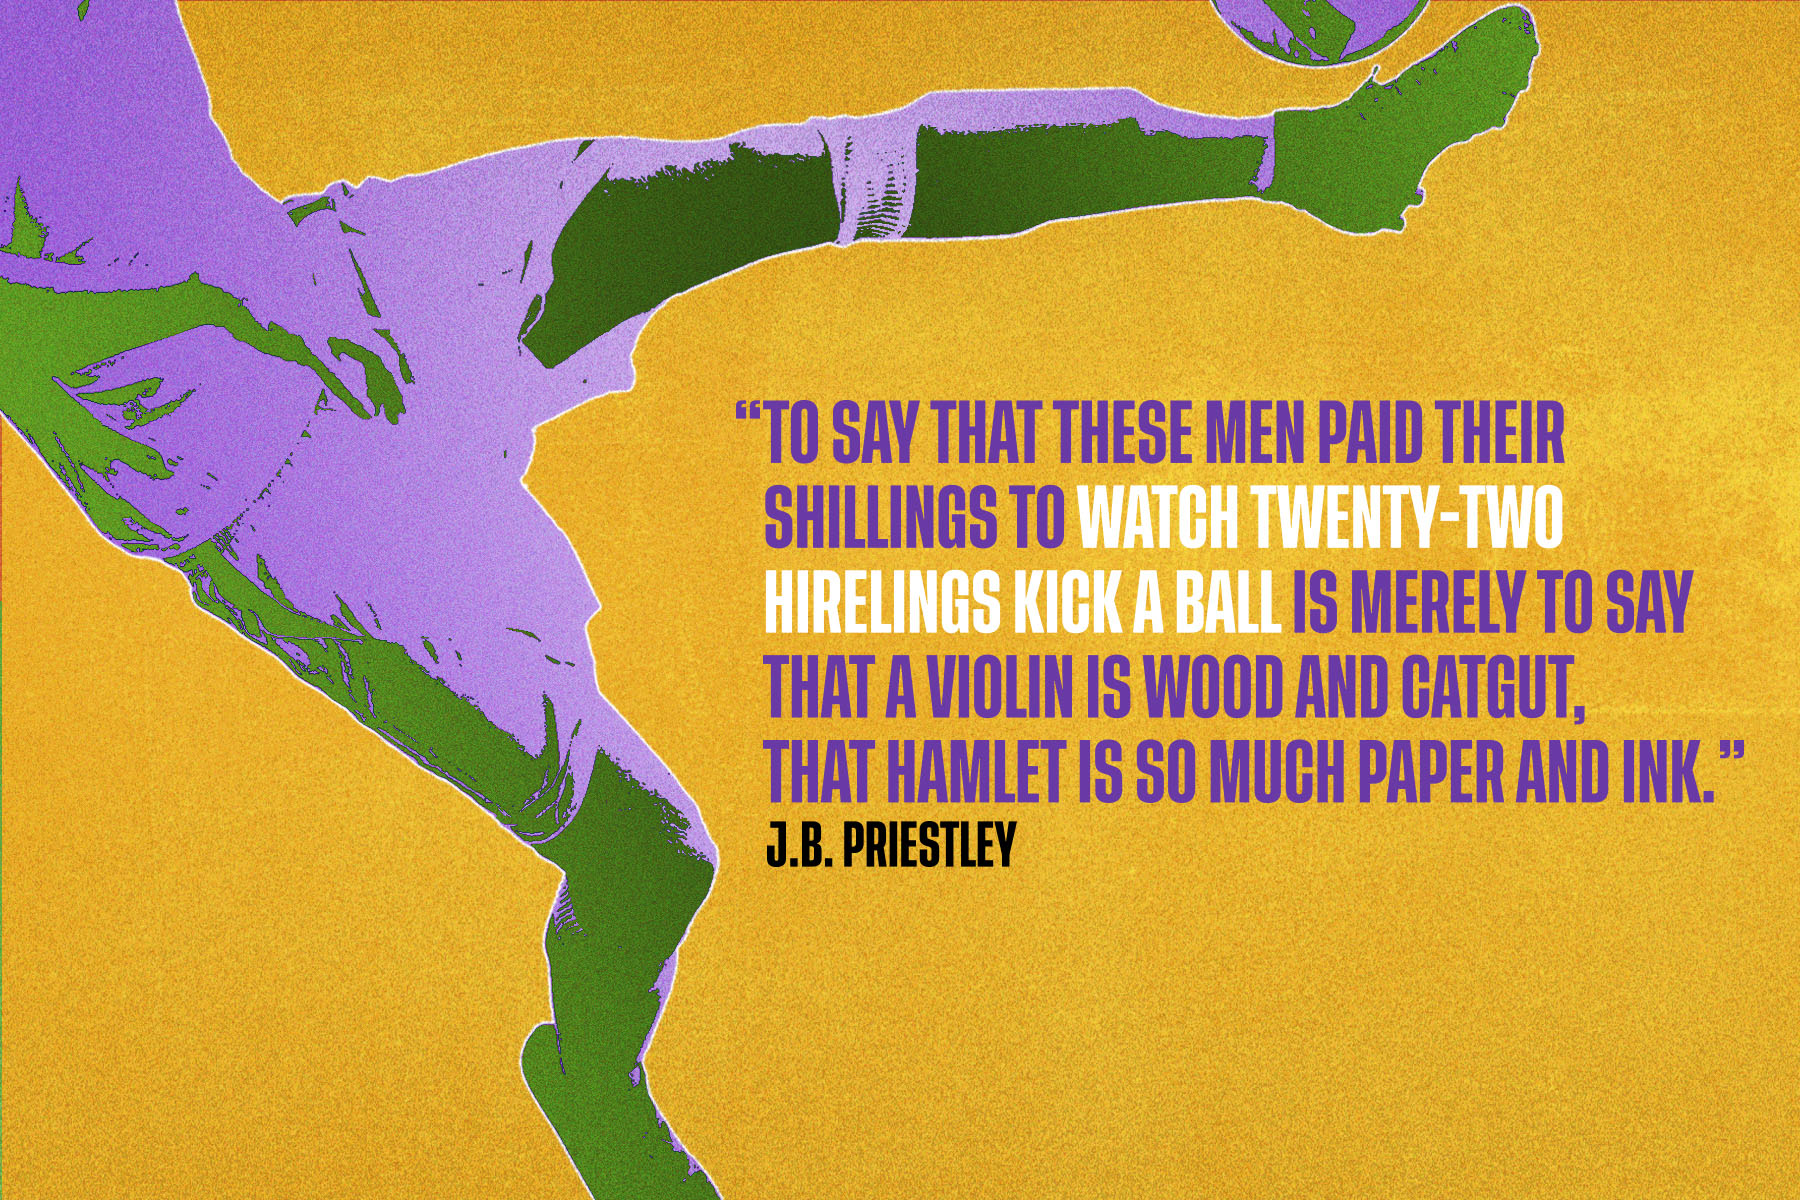 An illustration with a quote from J B Priestly that reads “To say that these men paid their shillings to watch twenty-two hirelings kick a ball is merely to say that a violin is wood and catgut, that Hamlet is so much paper and ink” against a yellow background, next to legs kicking a football.